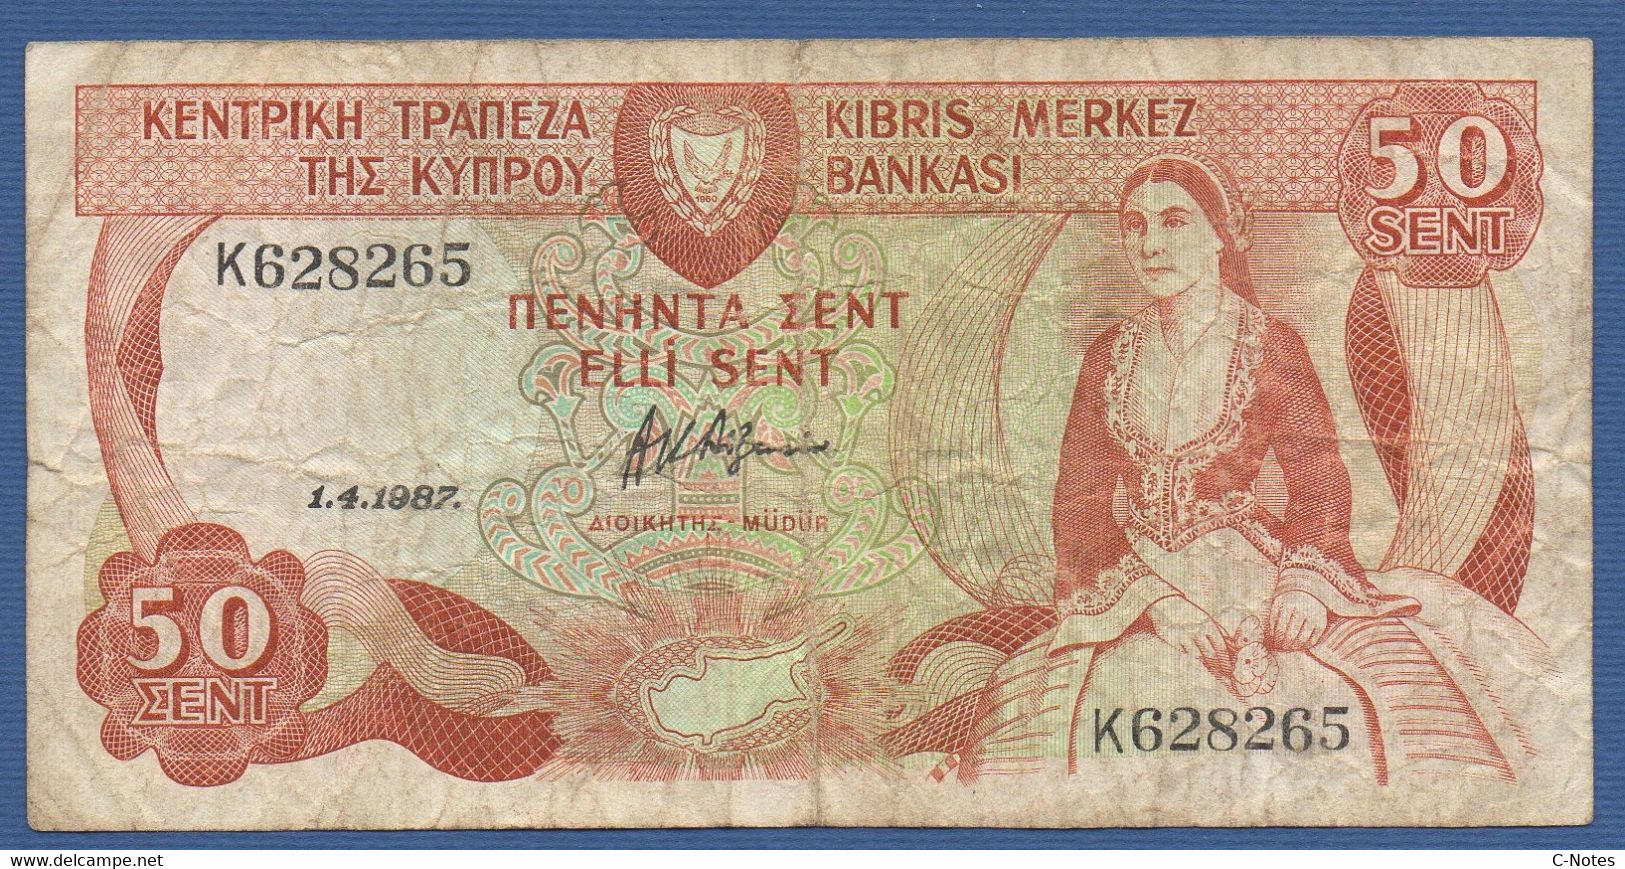 CYPRUS - P.52a – 50 Cents / Sent 01.04.1987 Circulated Serie K628265 - Cyprus